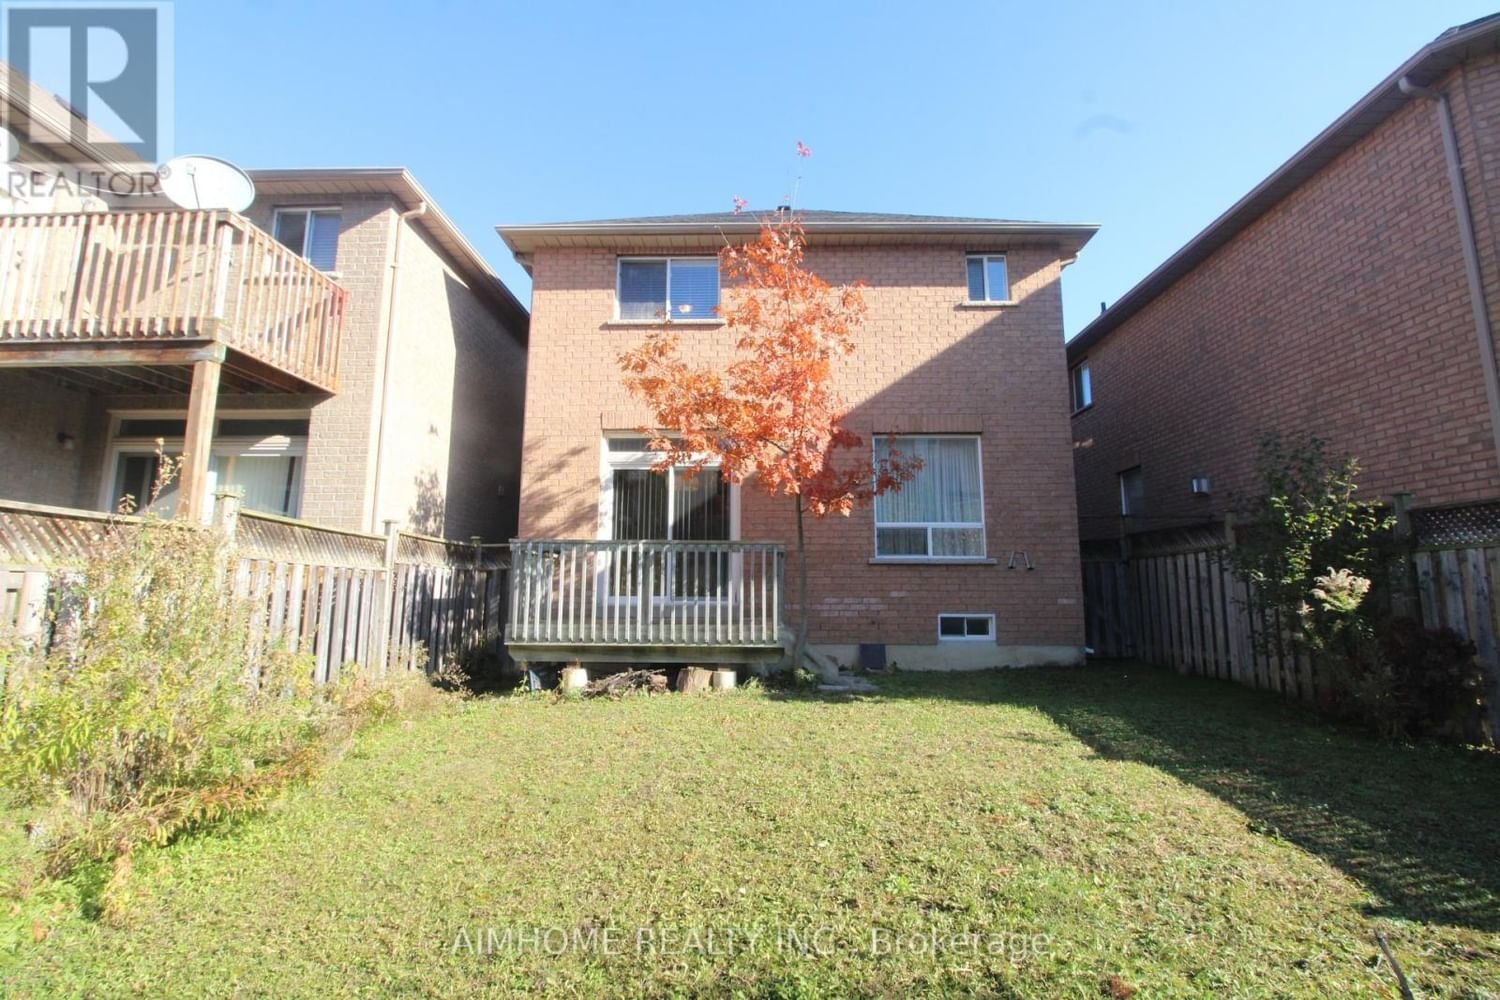 24 BEL CANTO CRES Image 24